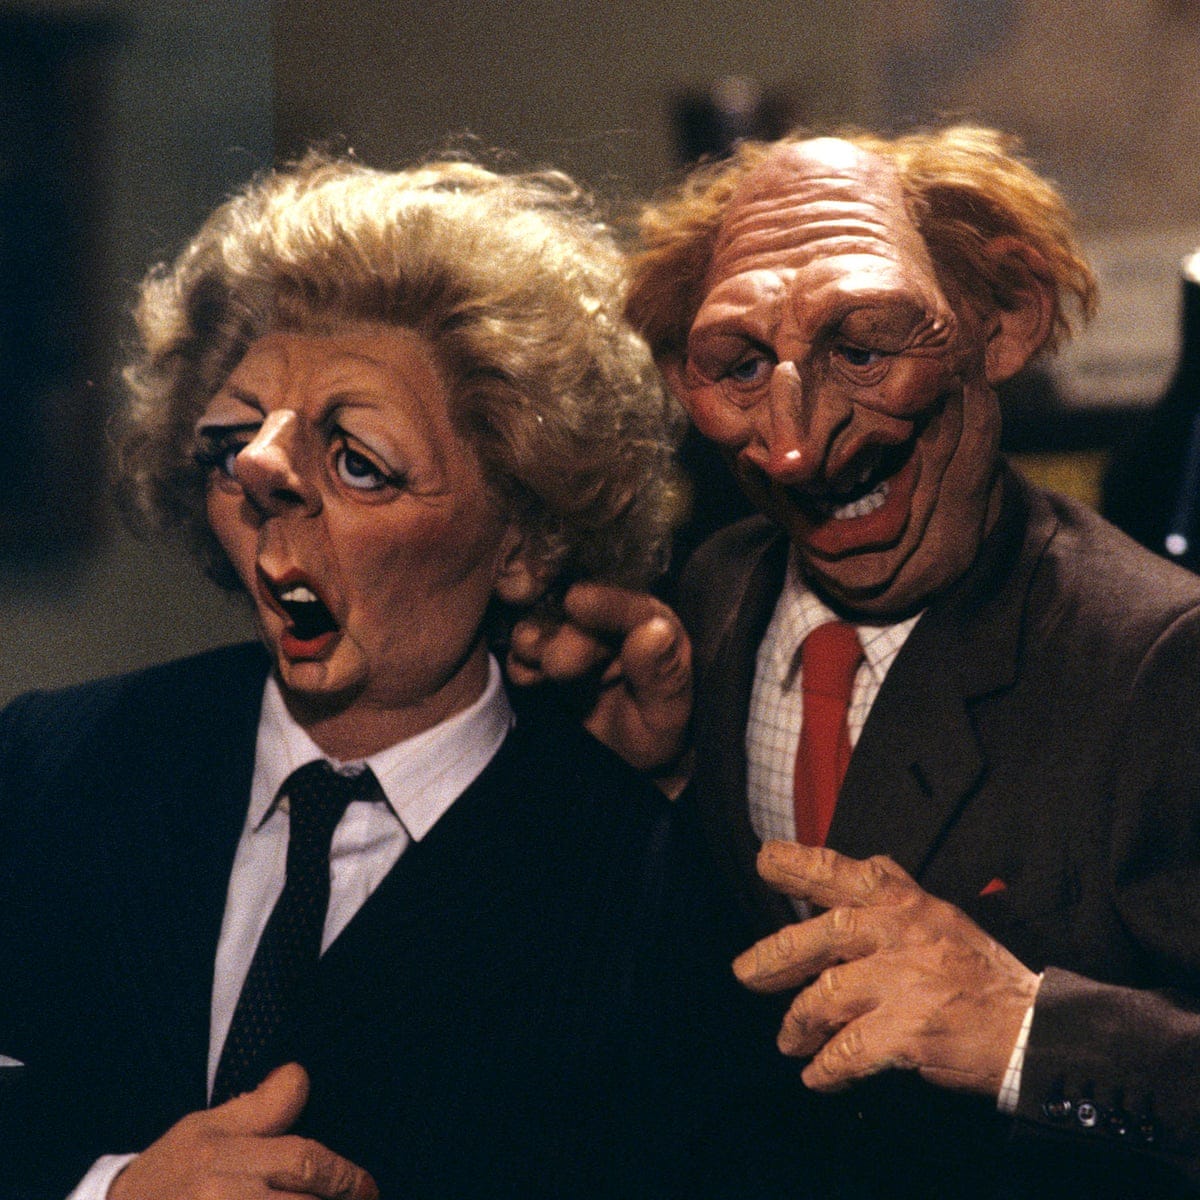 Thatcher loved it': Spitting Image victims on being lampooned | TV comedy |  The Guardian